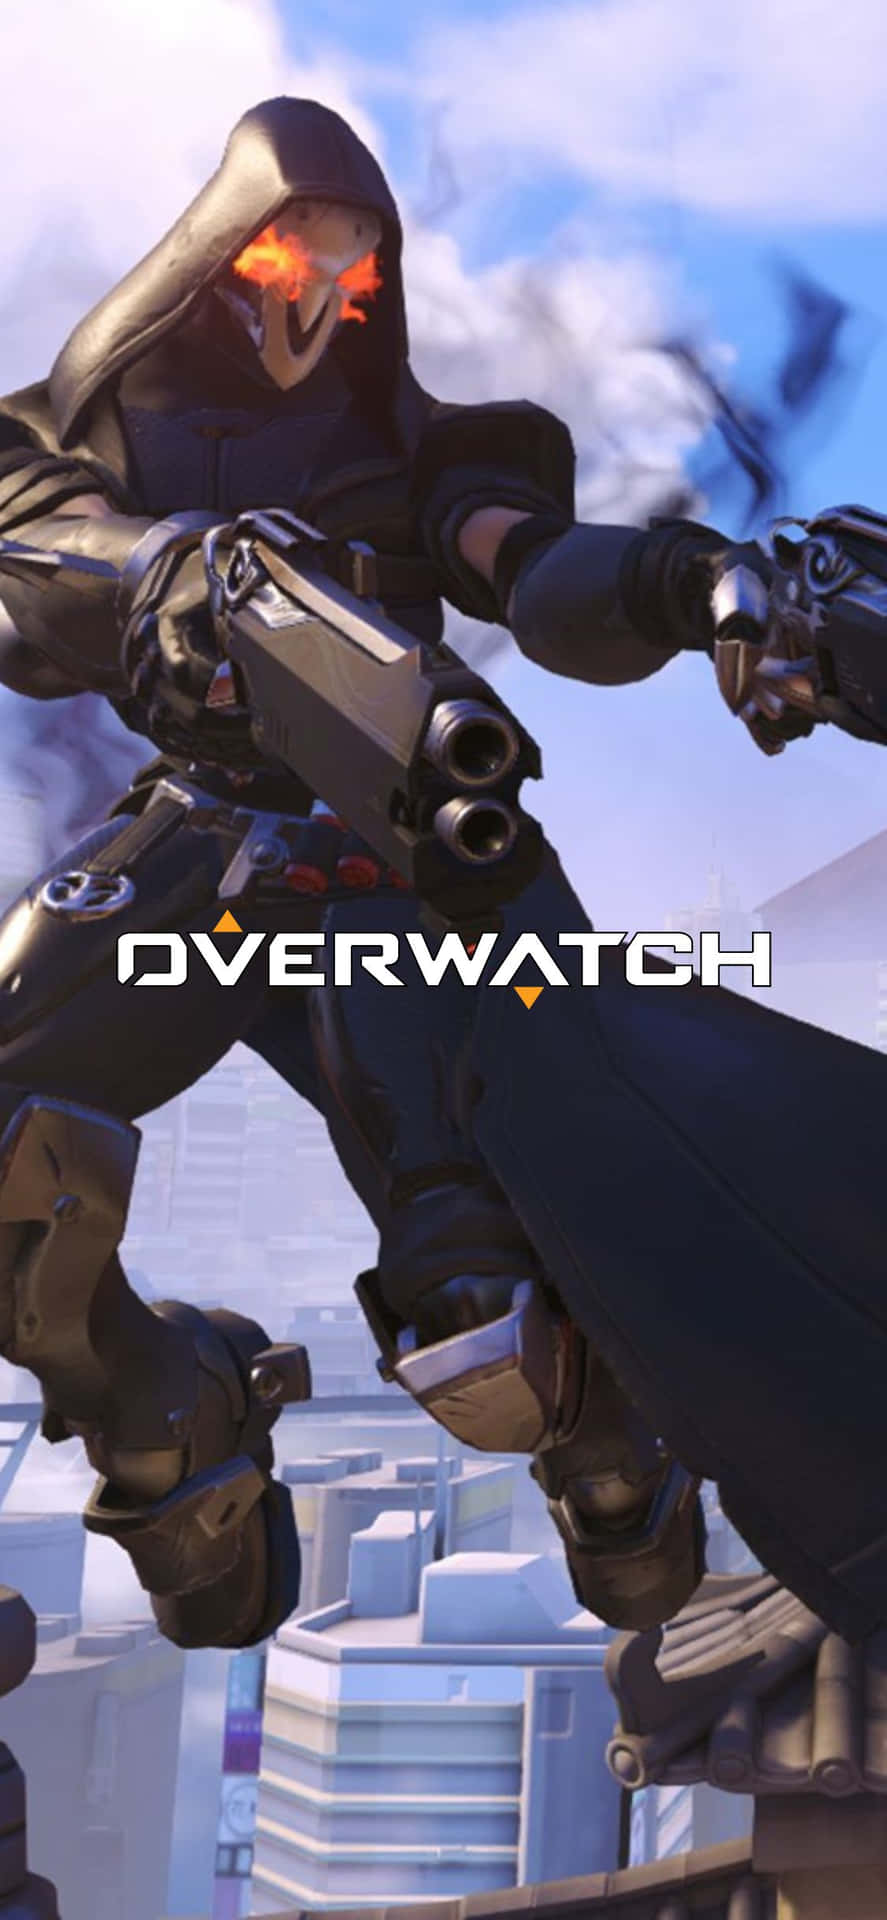 "Take your game to the next level with the Iphone X Overwatch background!"